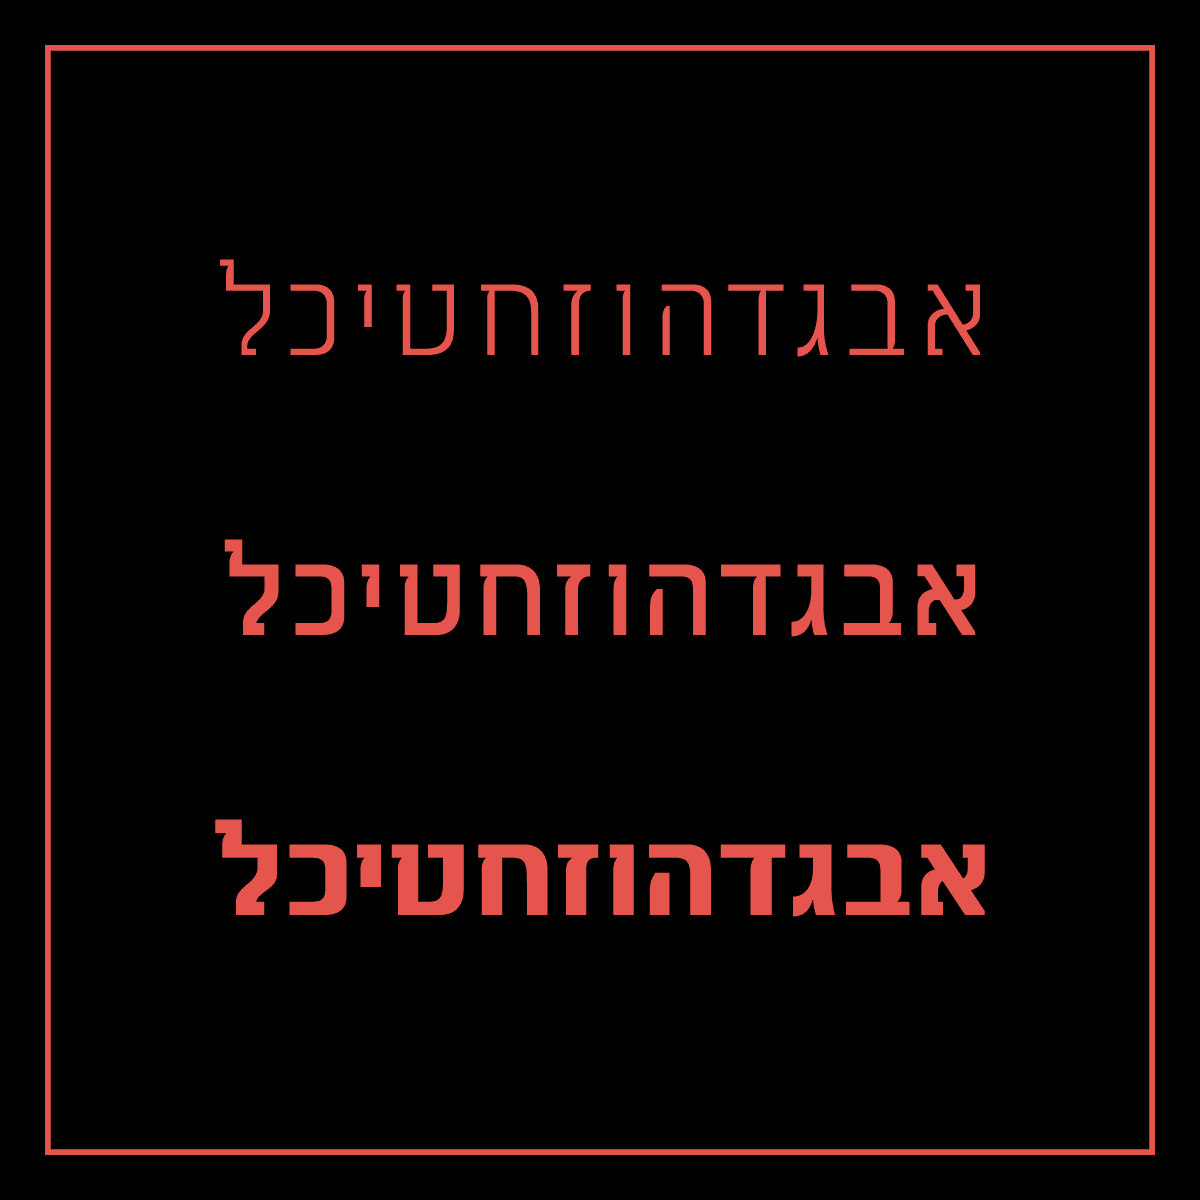 New Hebrew font I'm working on